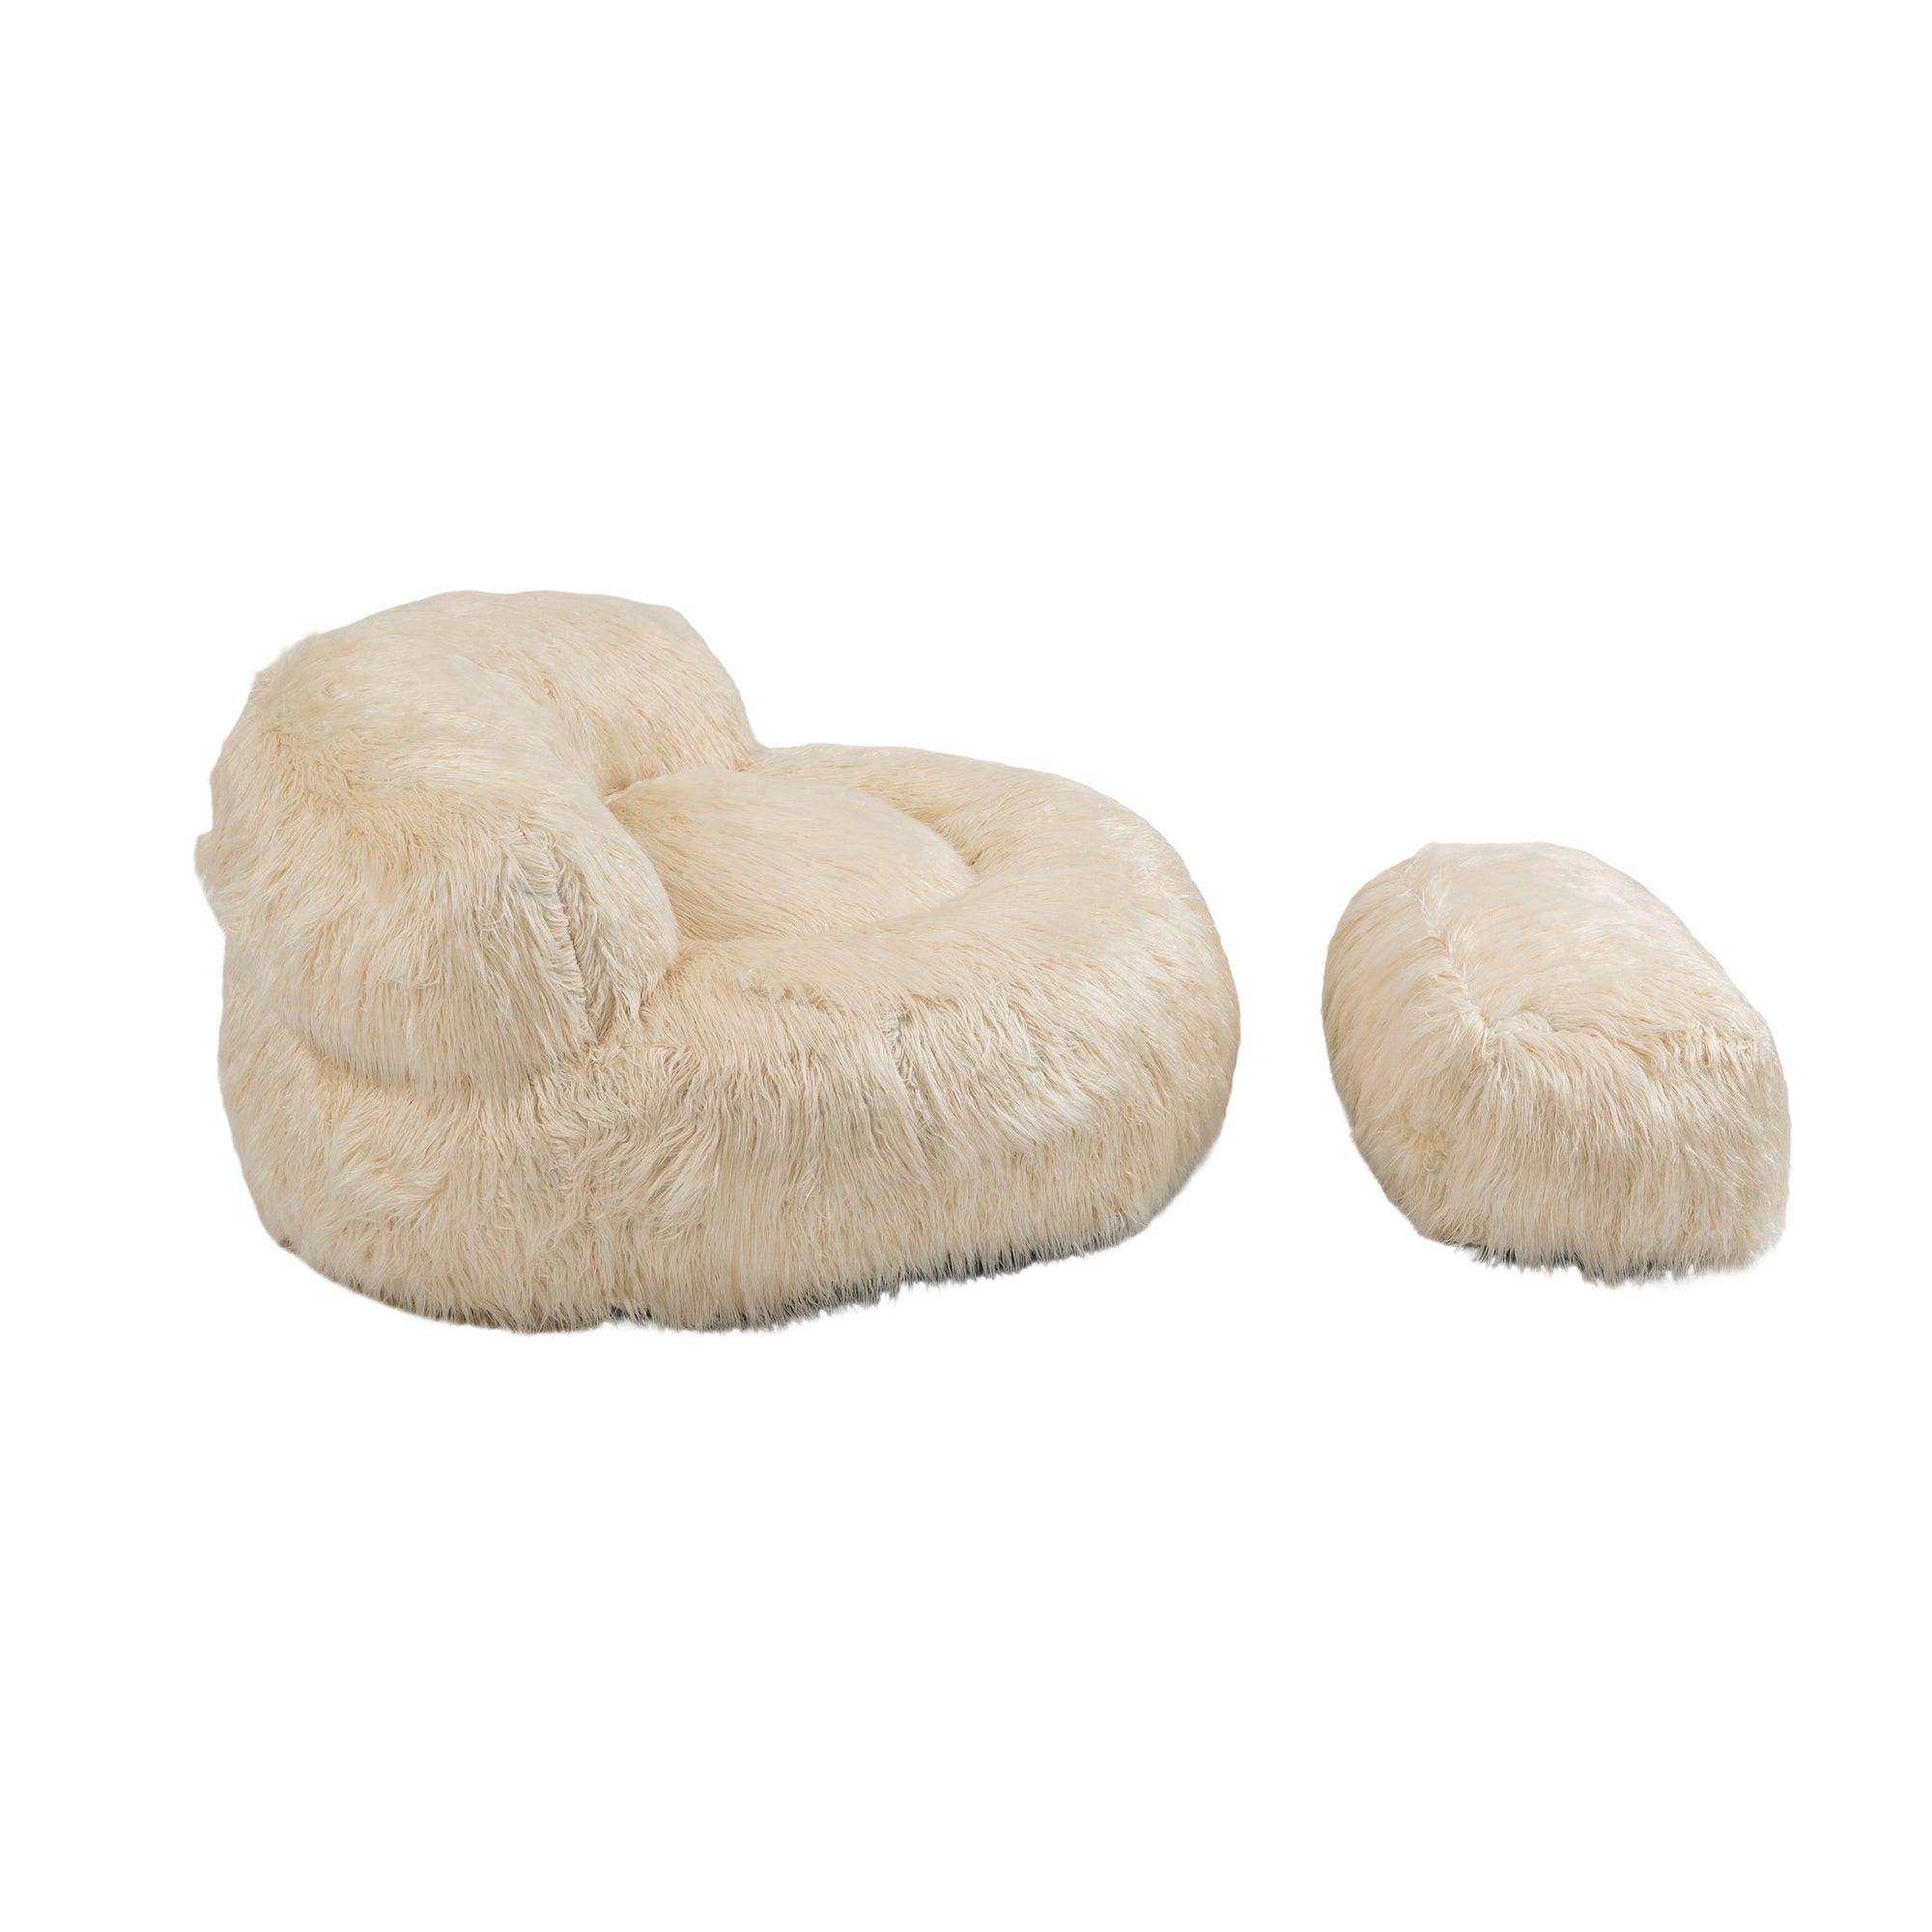 Gramanda 2-In-1 Bean Bag Chair Faux Fur Lazy Sofa & Ottoman Footstool For Adults And Kids - Beige